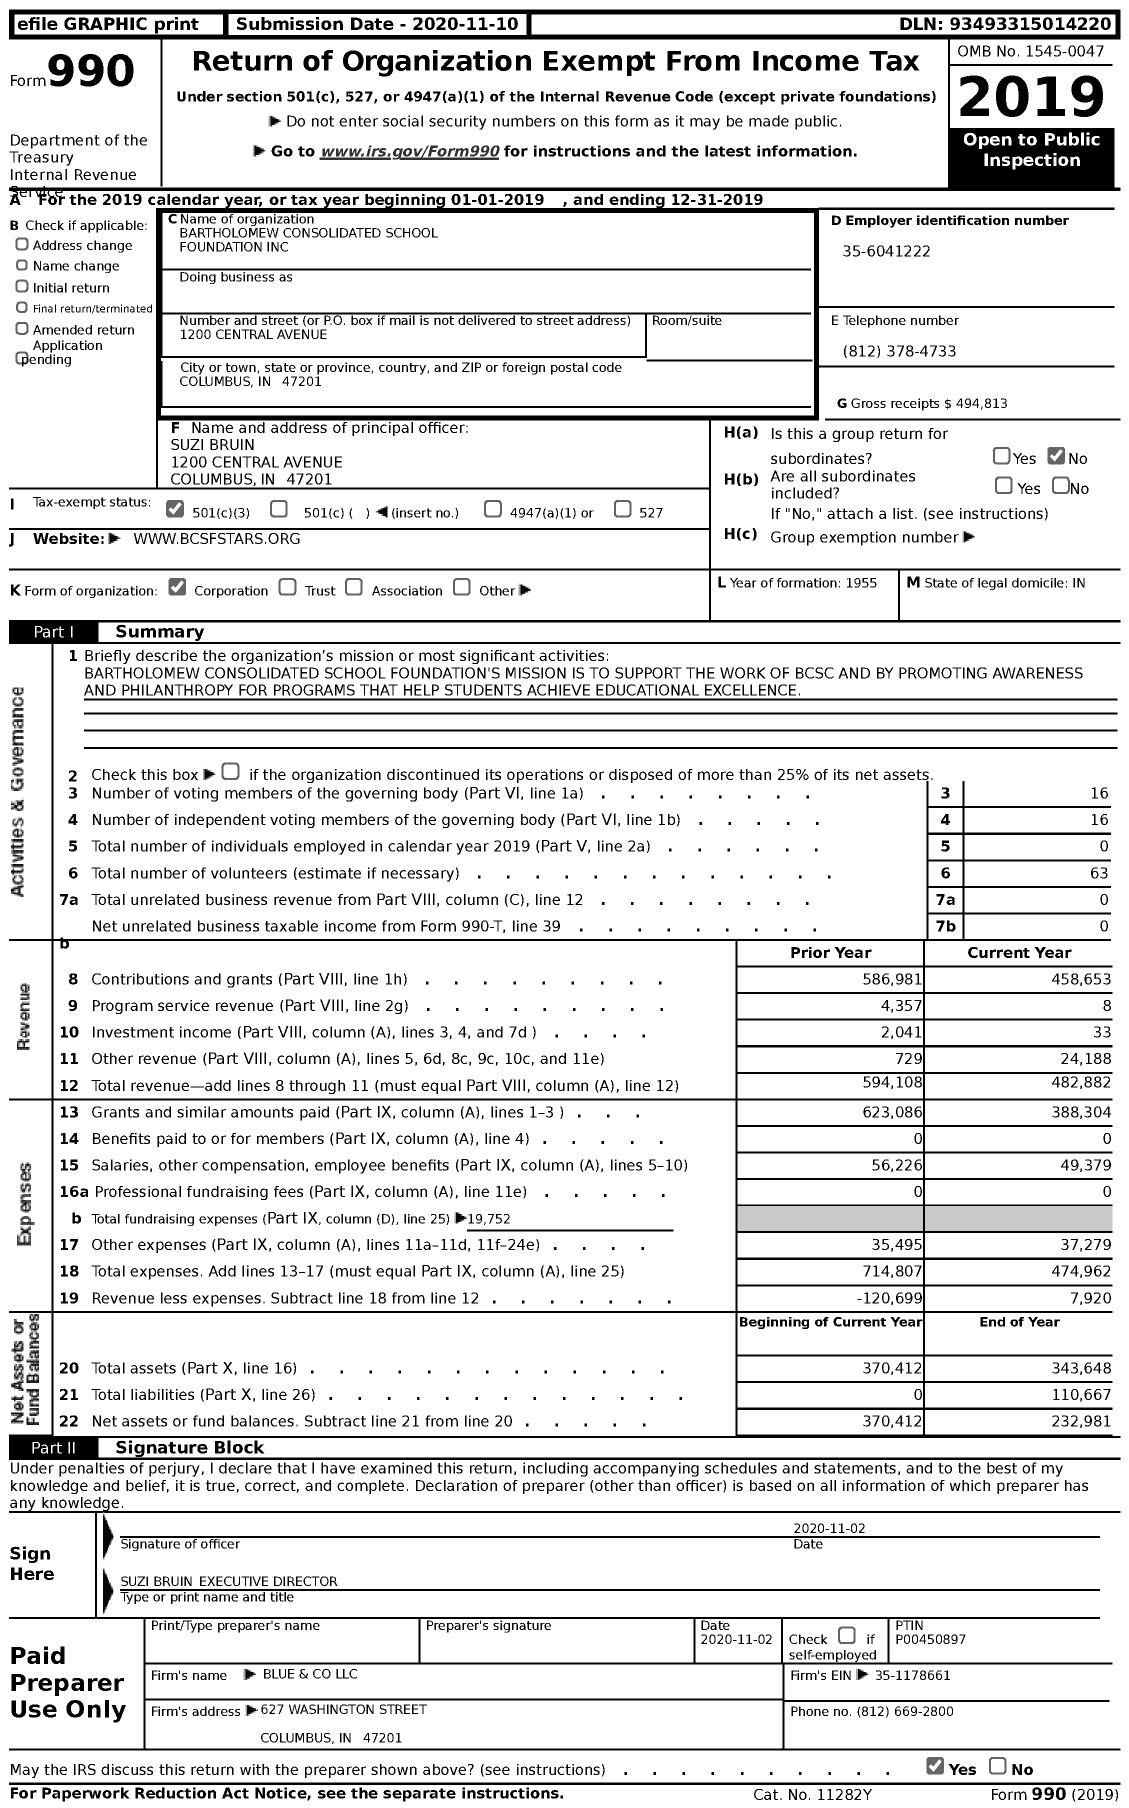 Image of first page of 2019 Form 990 for Bartholomew Consolidated School Foundation